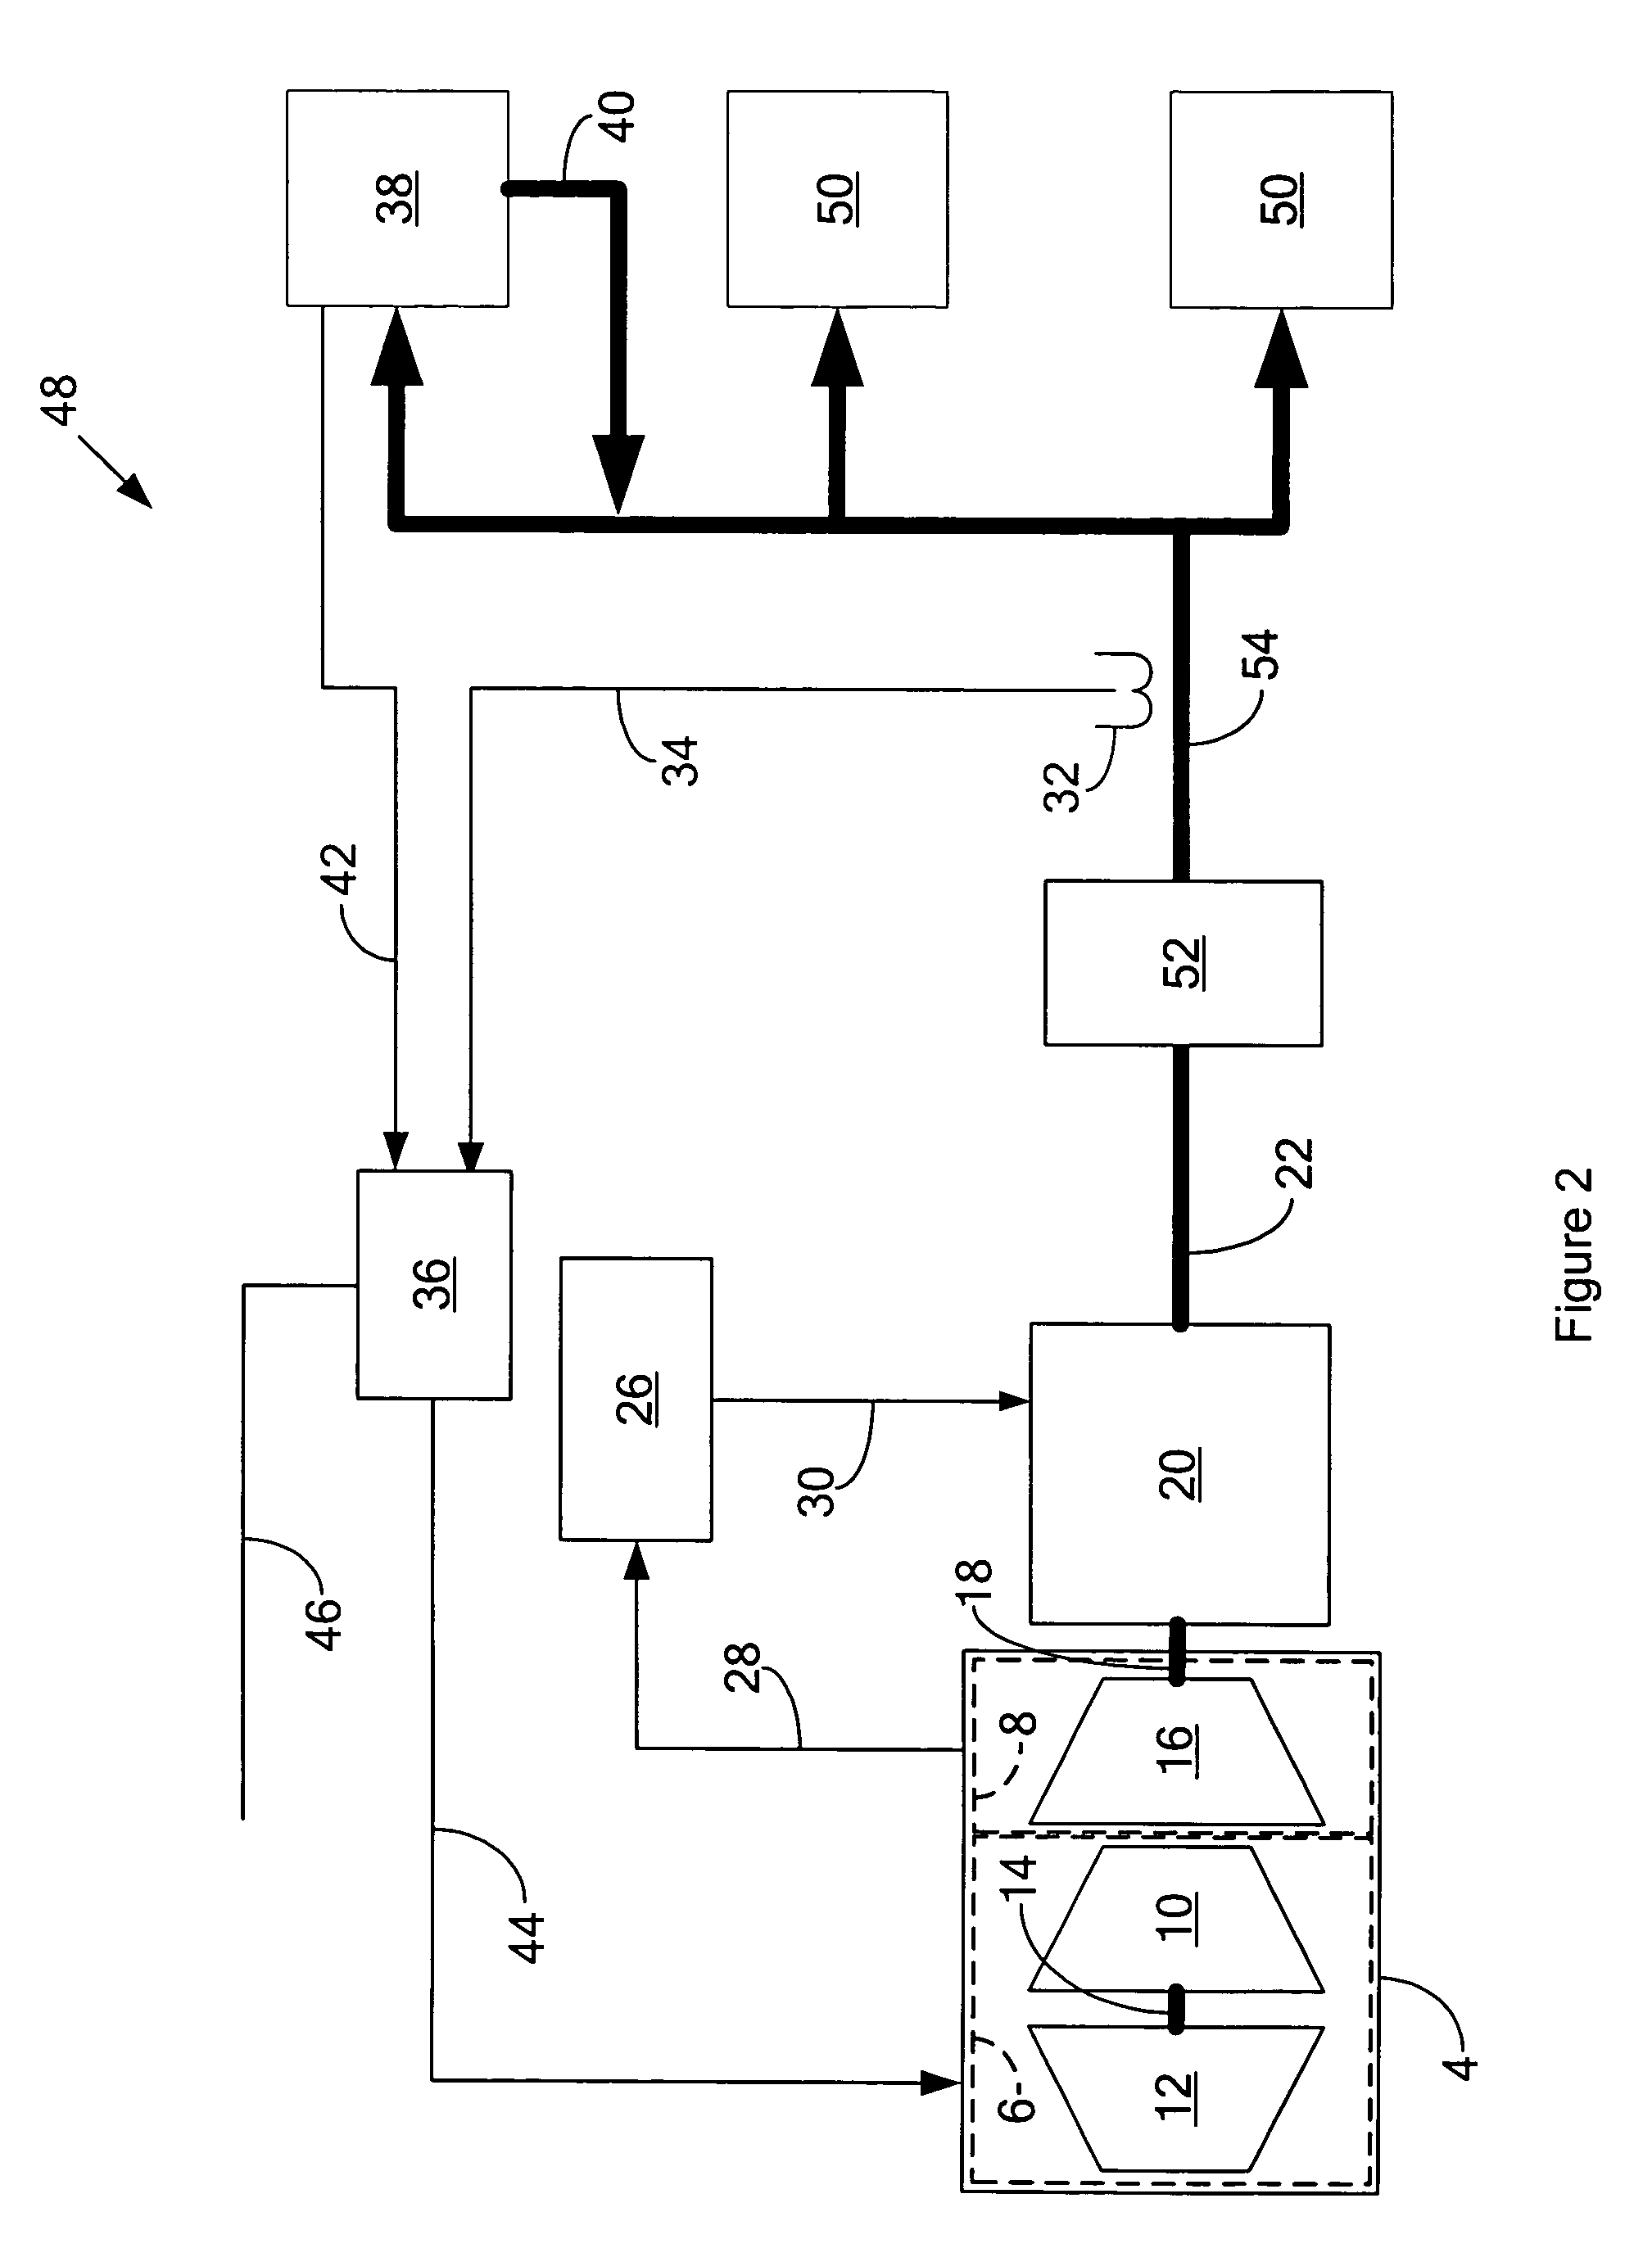 Power turbine speed control using electrical load following